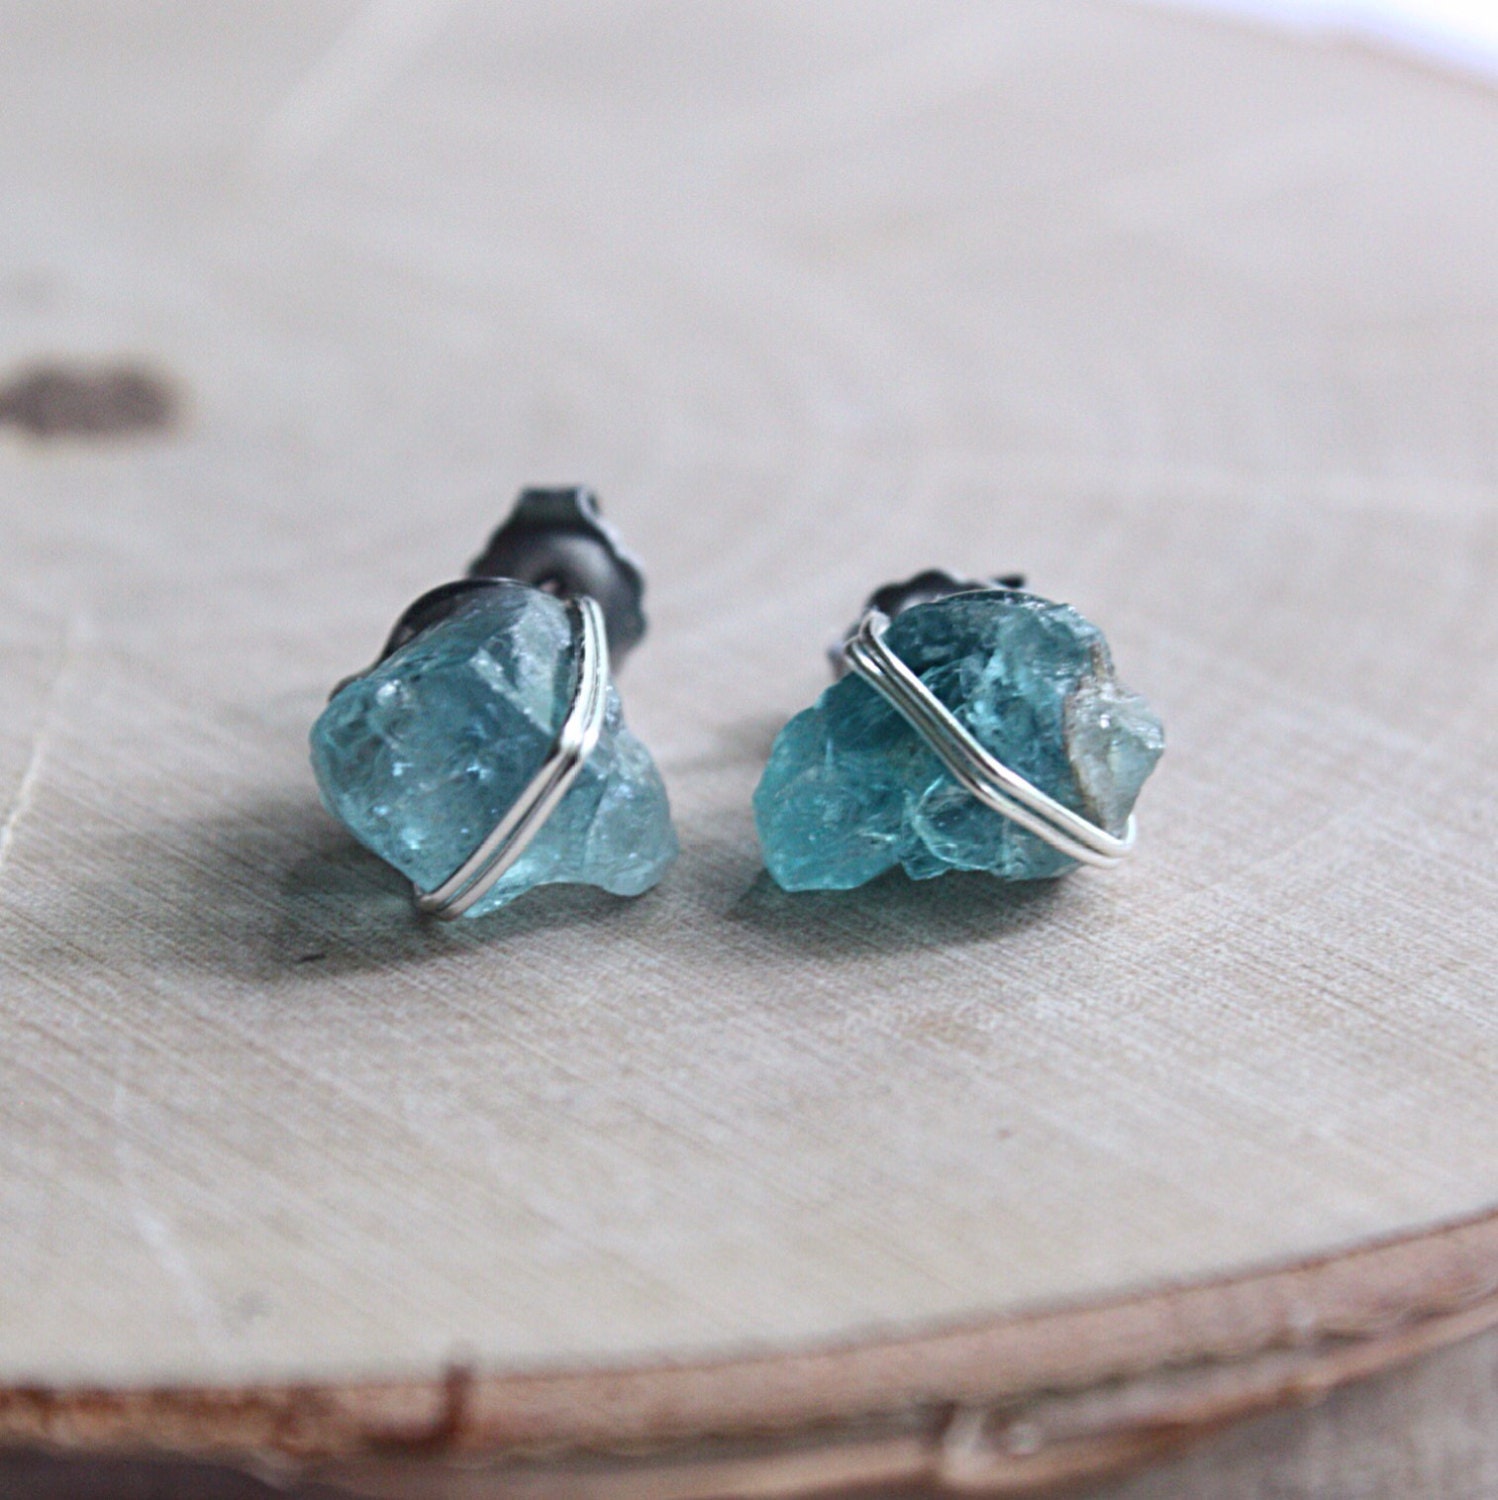 Blue Apatite Crystal Stud Earrings wrapped in Silver Wire Raw